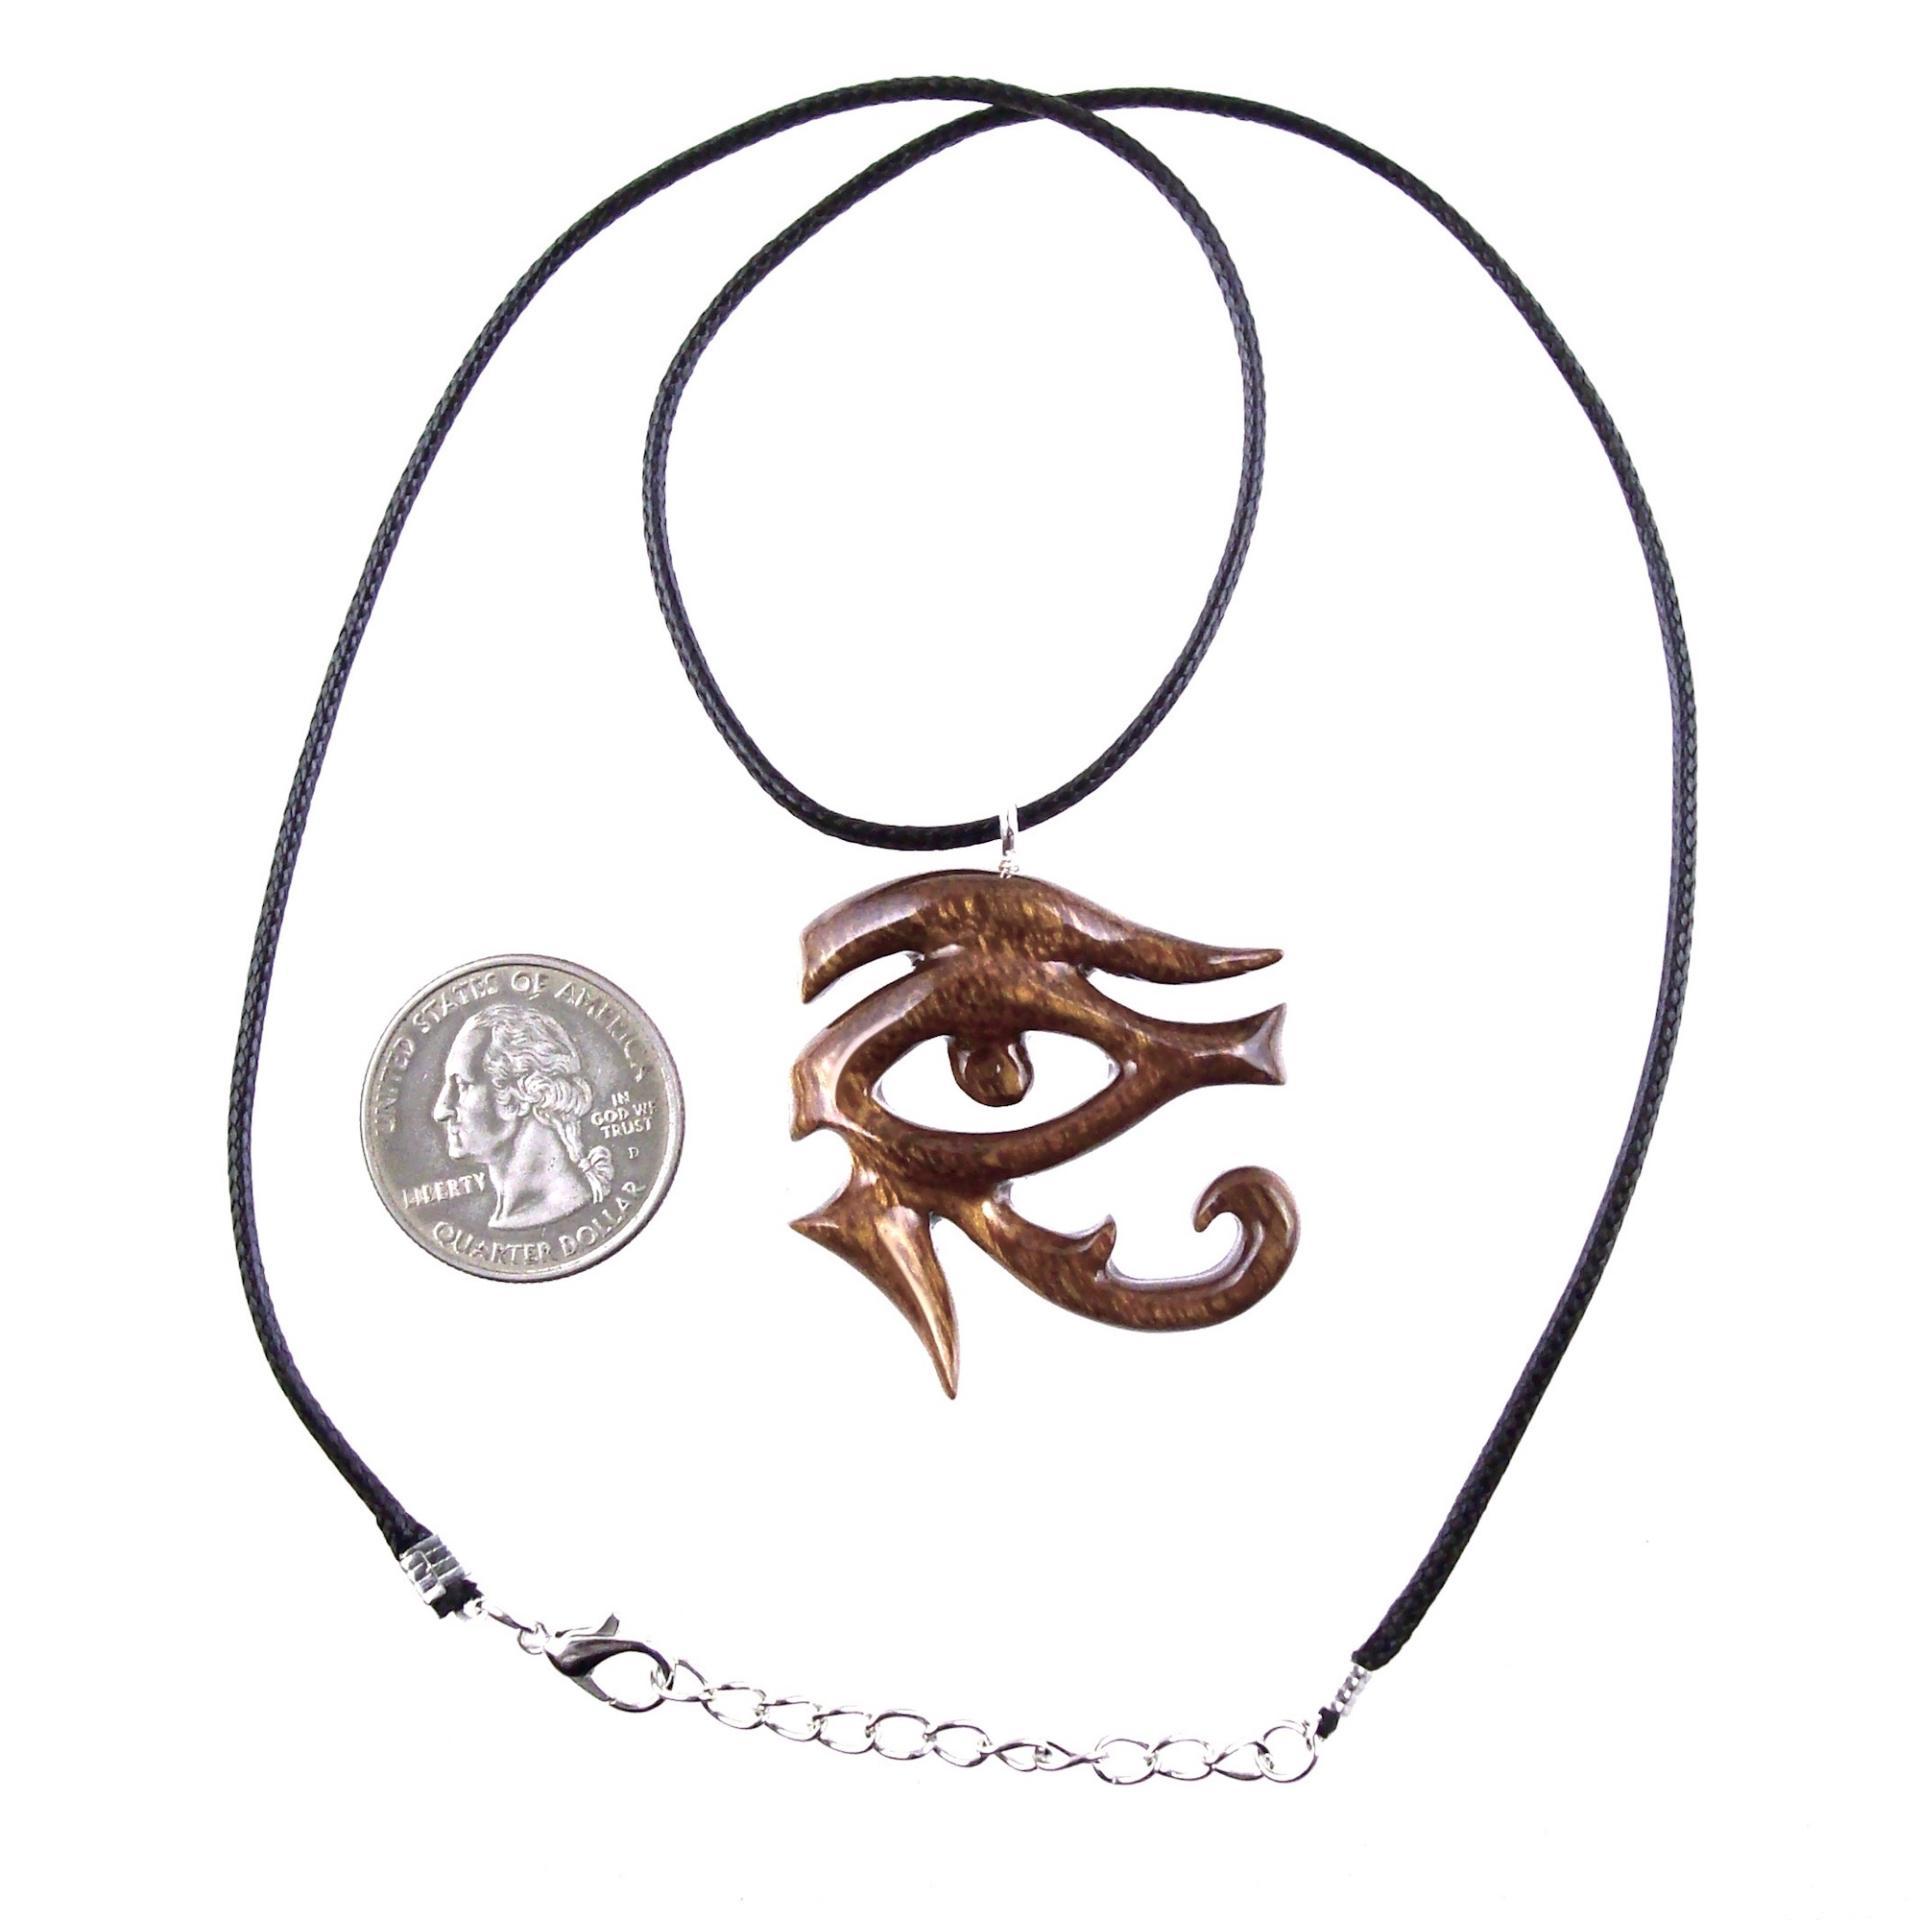 Eye of Horus Pendant, Hand Carved Wooden Eye of Ra Necklace, Egyptian African Wood Jewelry for Men or Women, Gift for Him Her